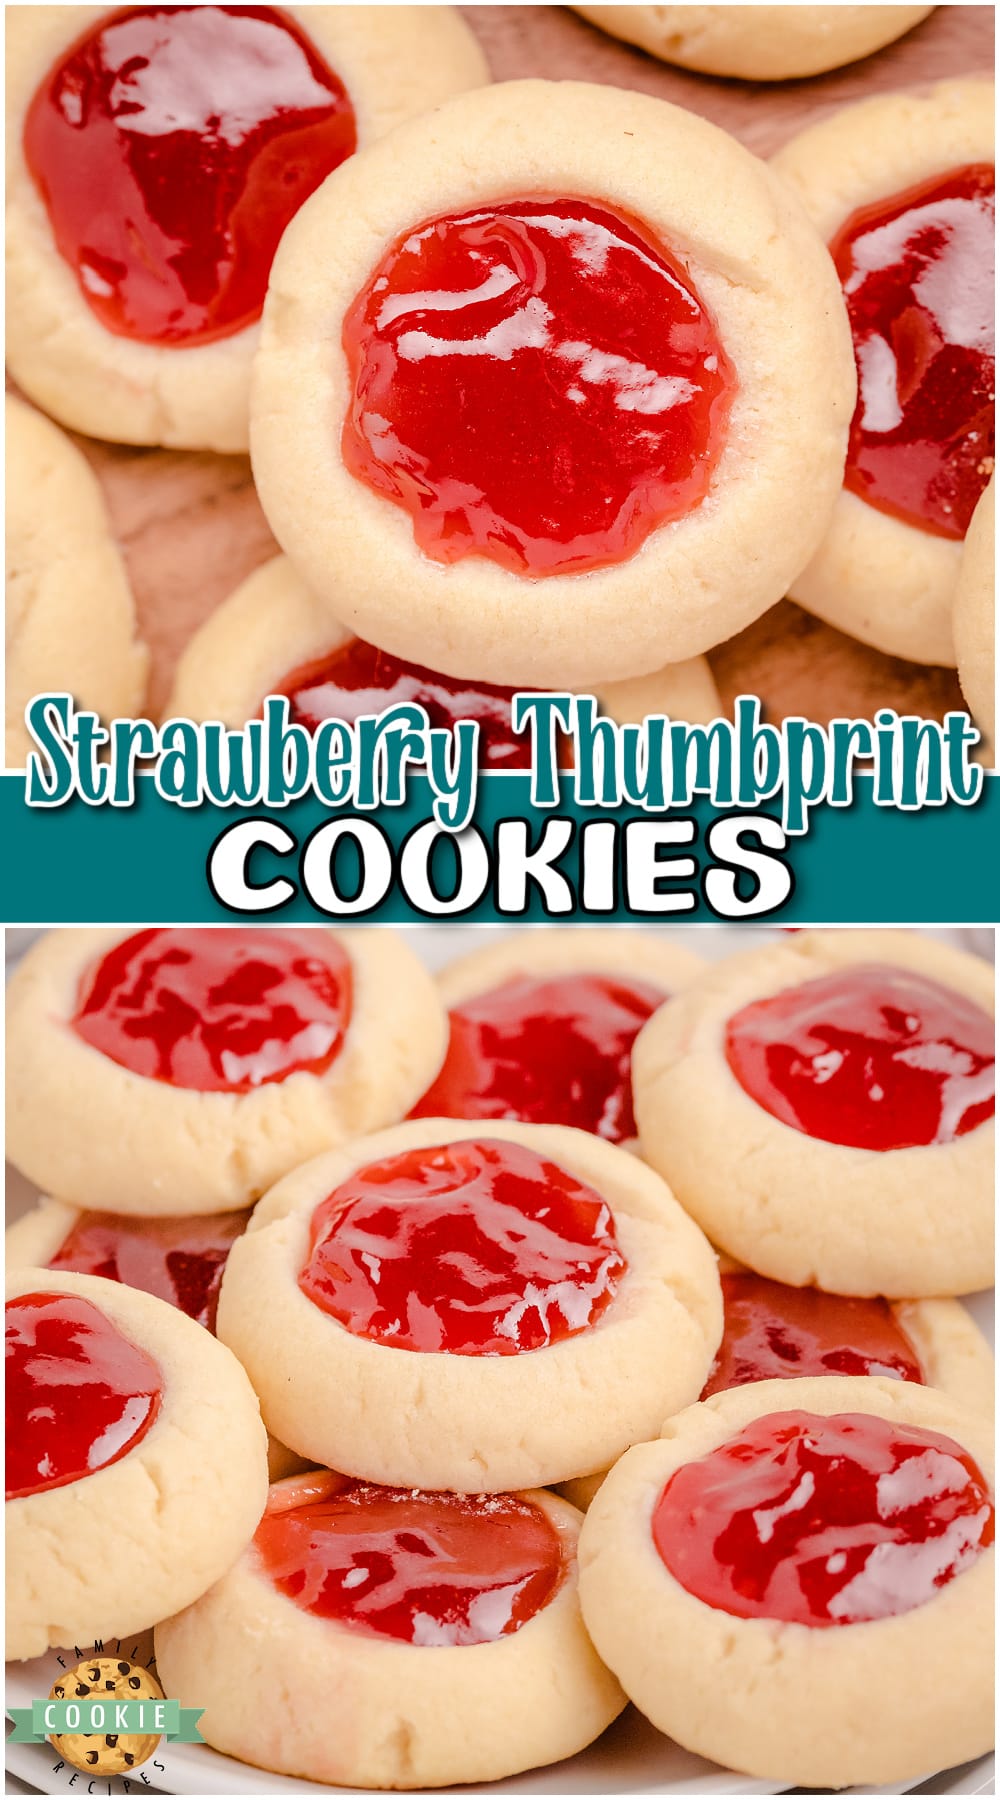 Strawberry Thumbprint Cookies are a soft, buttery melt-in-your-mouth cookie topped with sweet strawberry jam! Classic thumbprint cookies with jam are made easy with pantry ingredients & taste delicious!